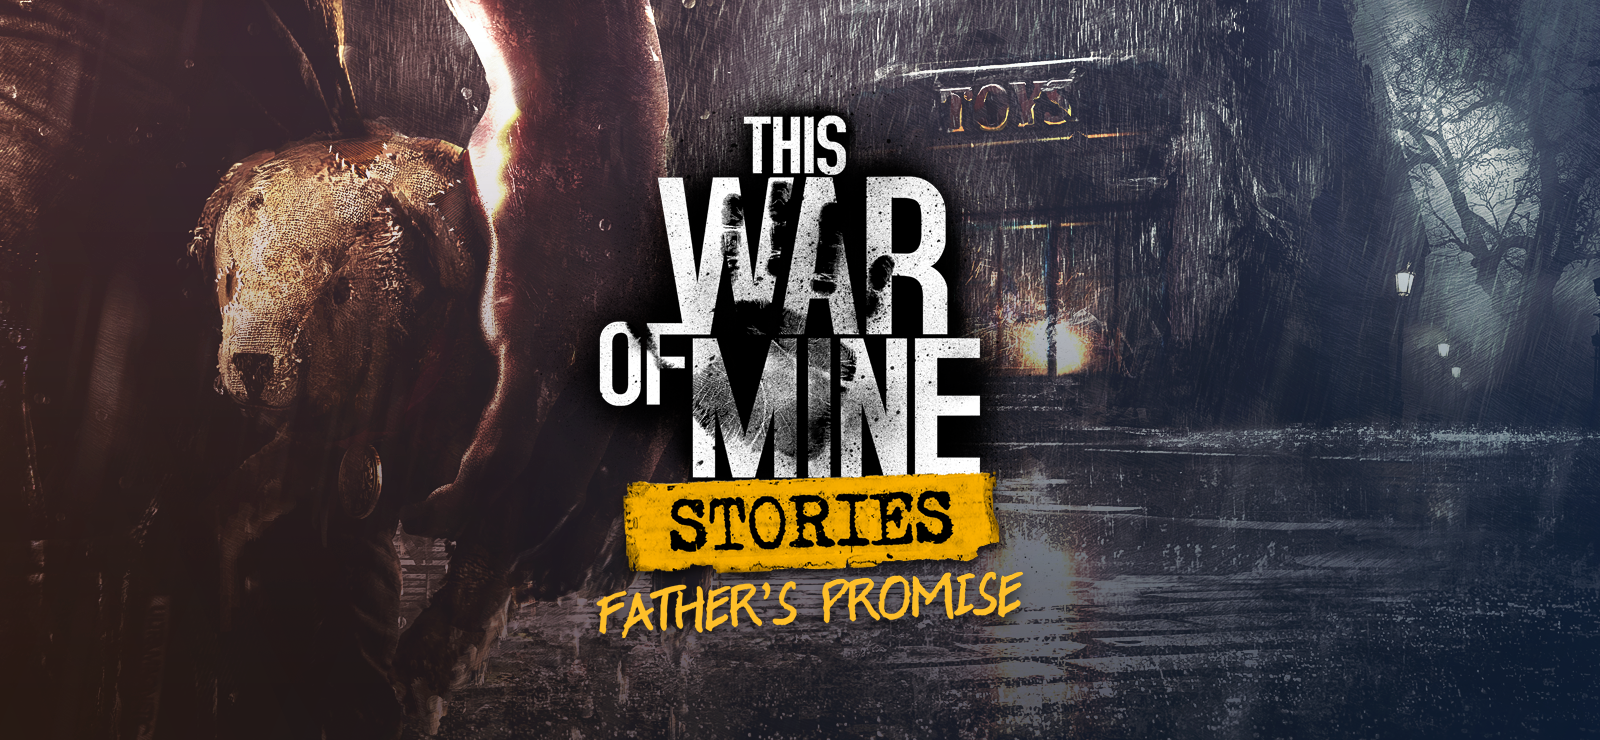 This War Of Mine: Stories - Father's Promise